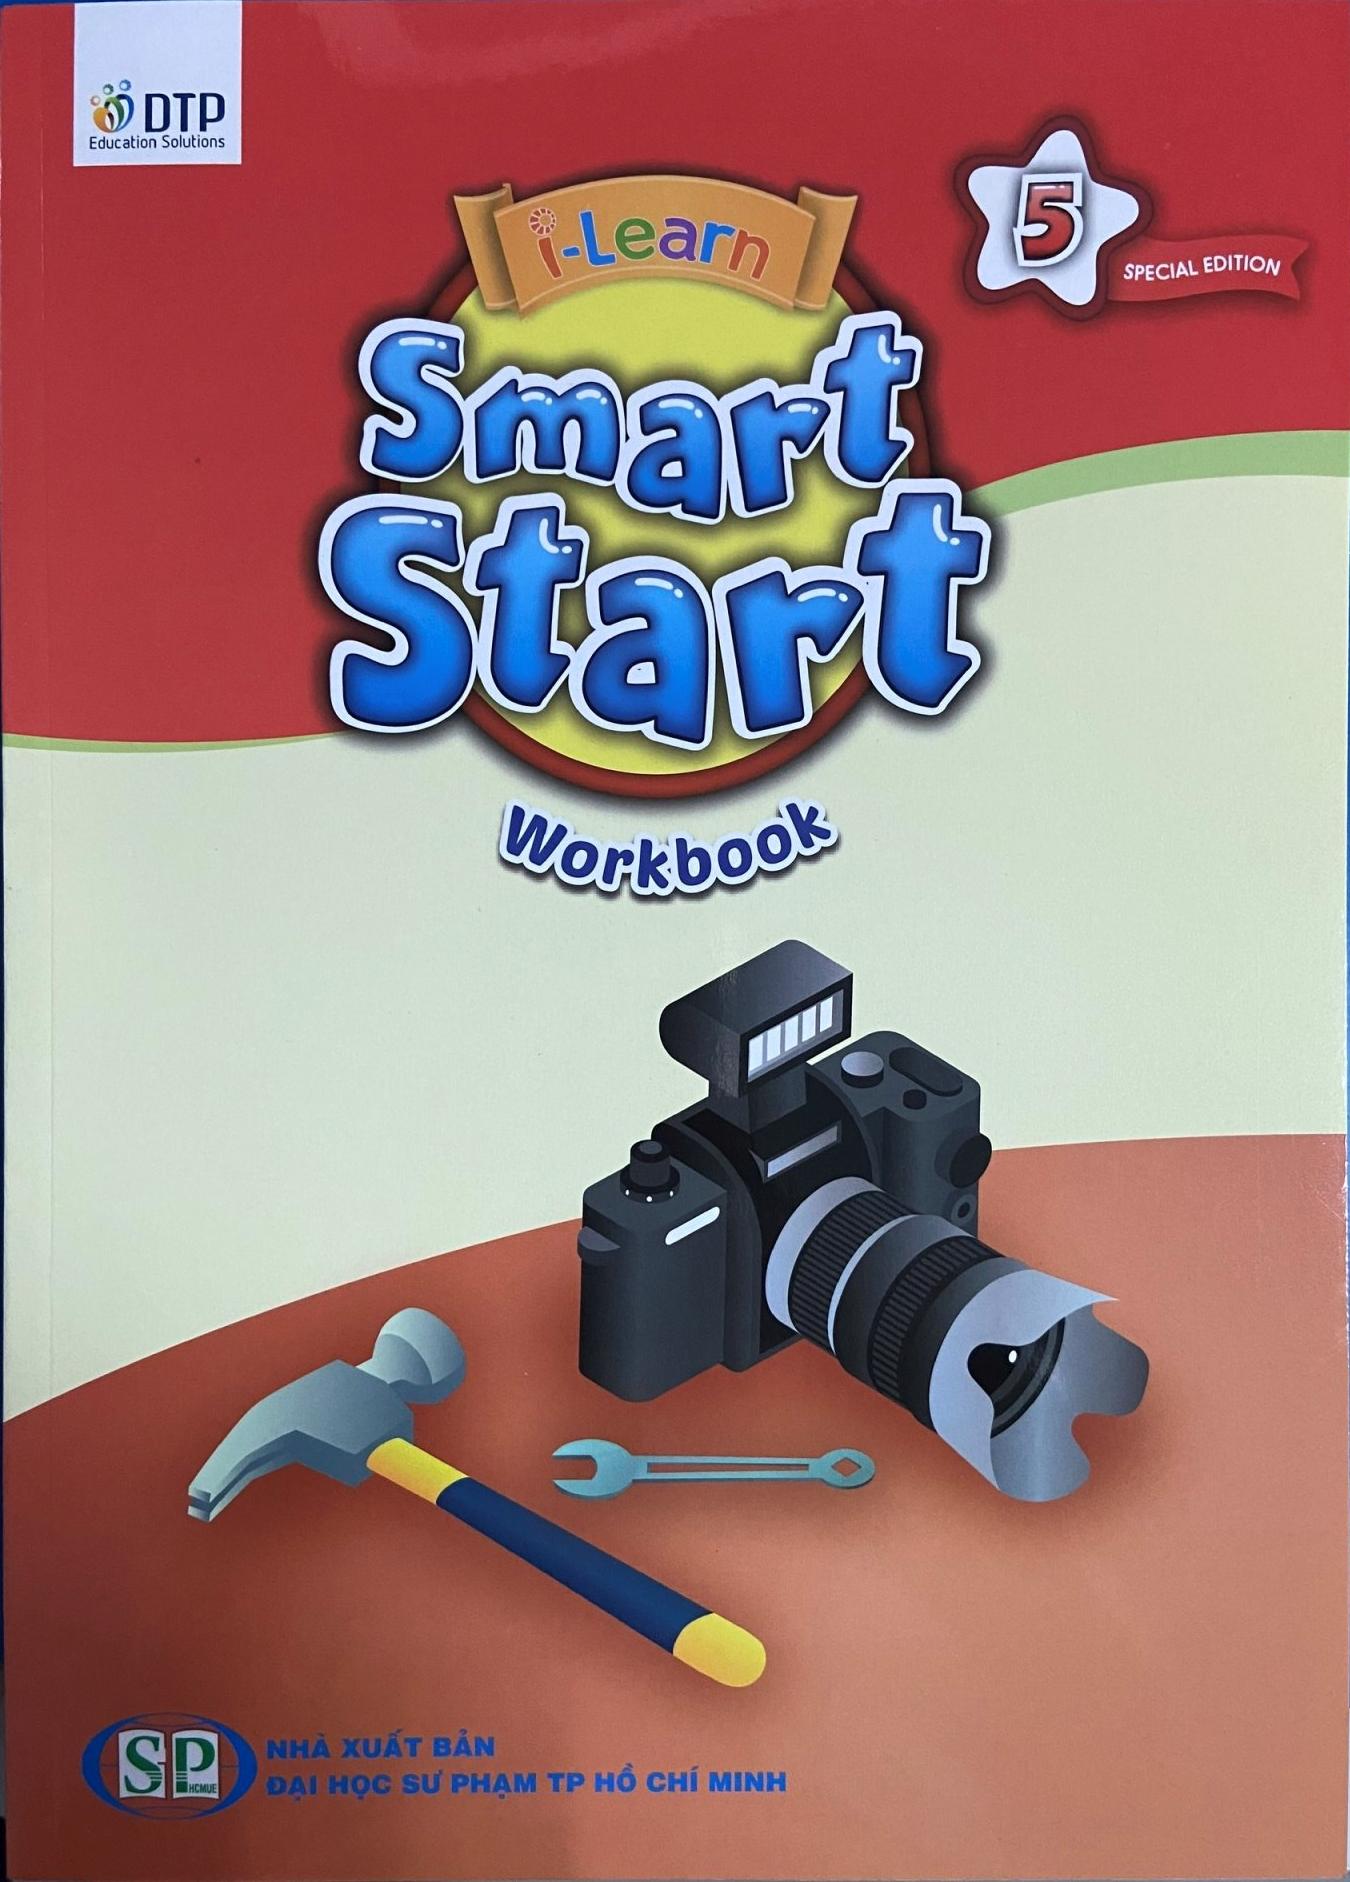 i-Learn Smart Start 5 Workbook Special Edition